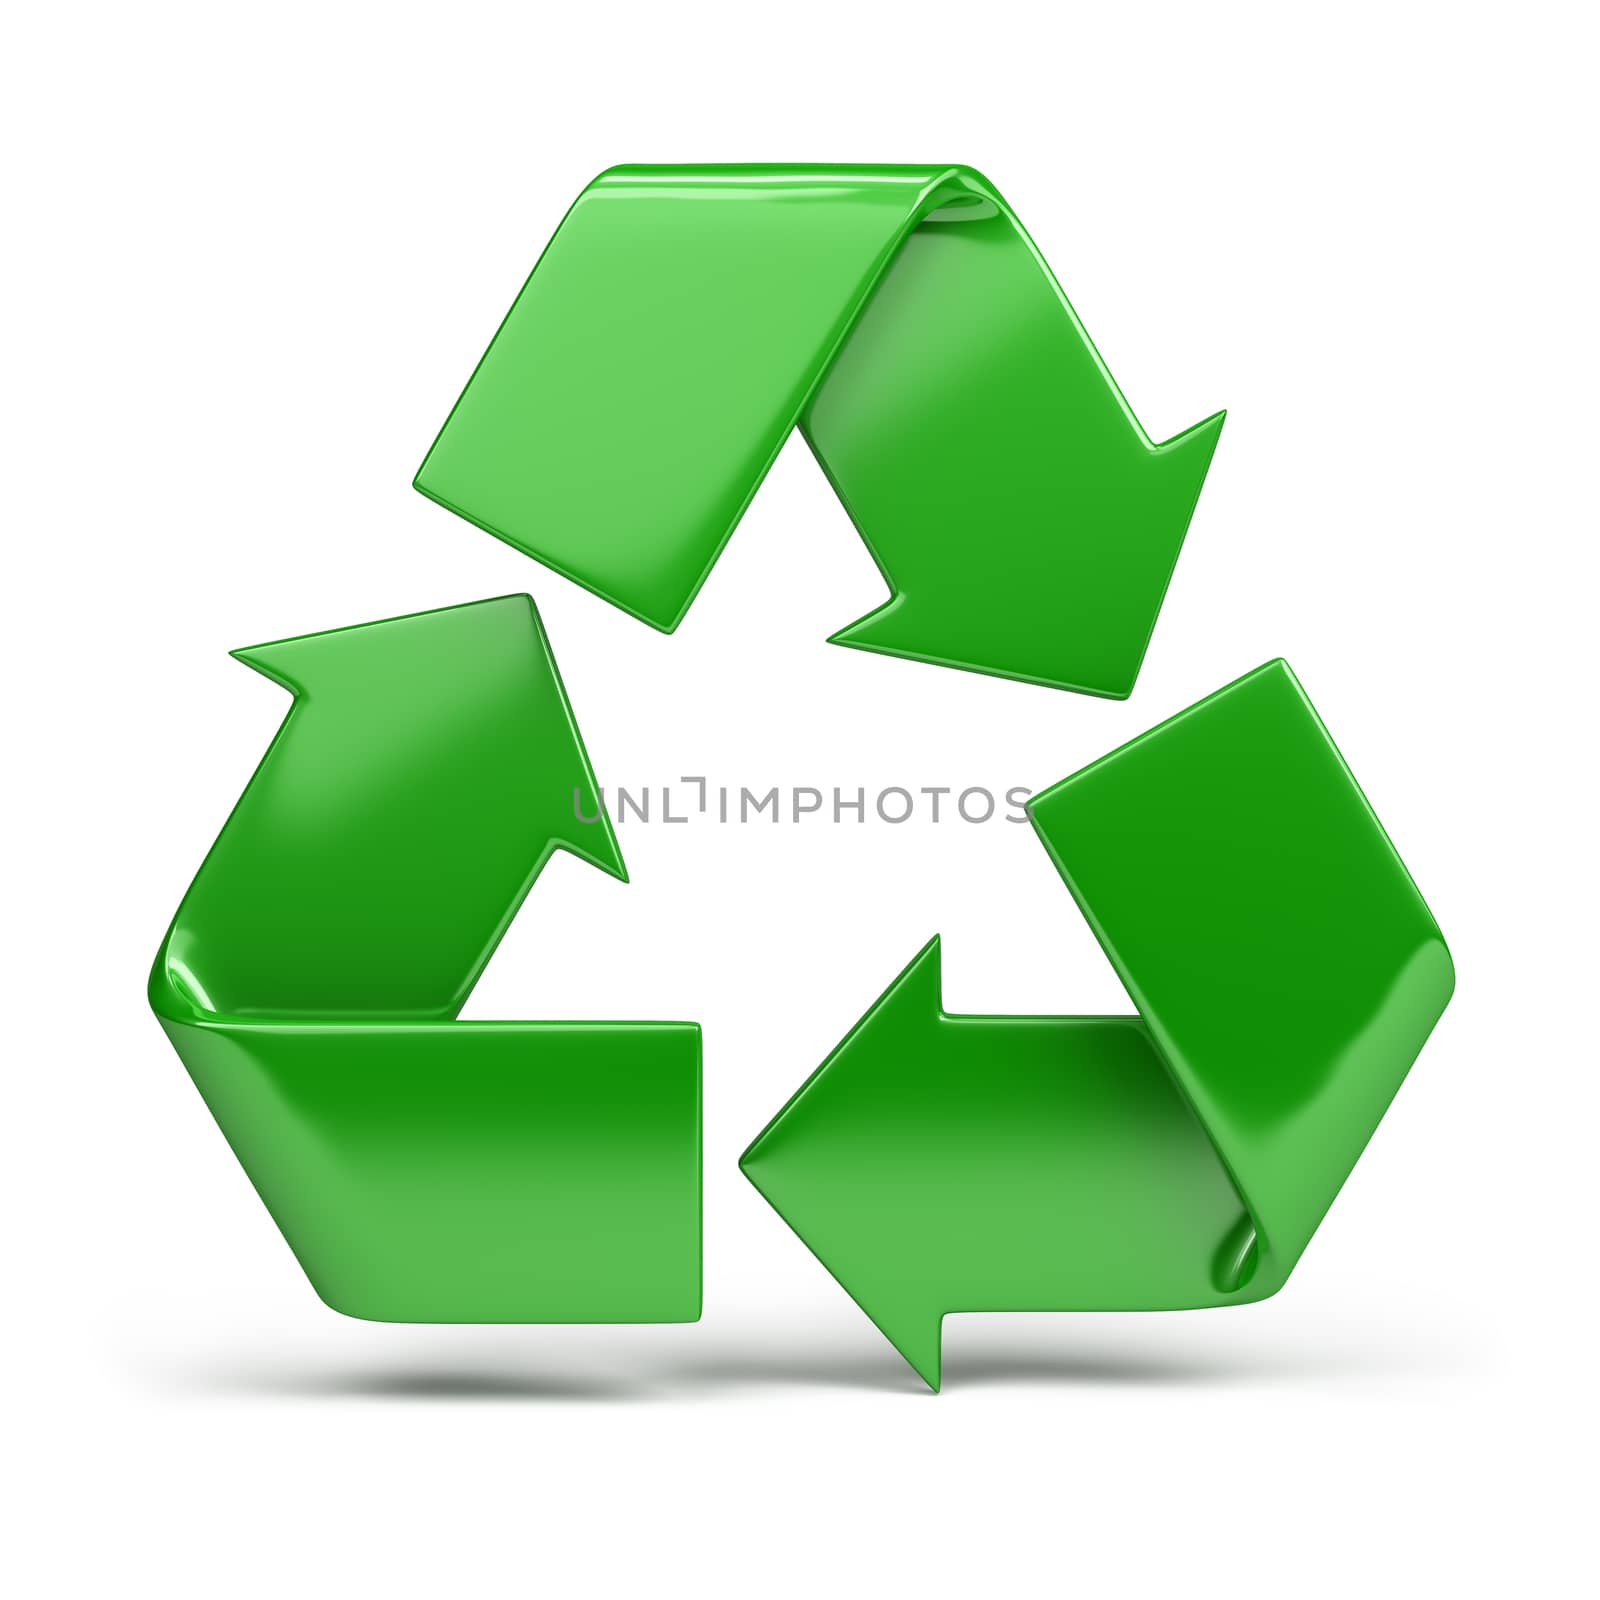 green, shiny recycling symbol. 3d image. Isolated white background.